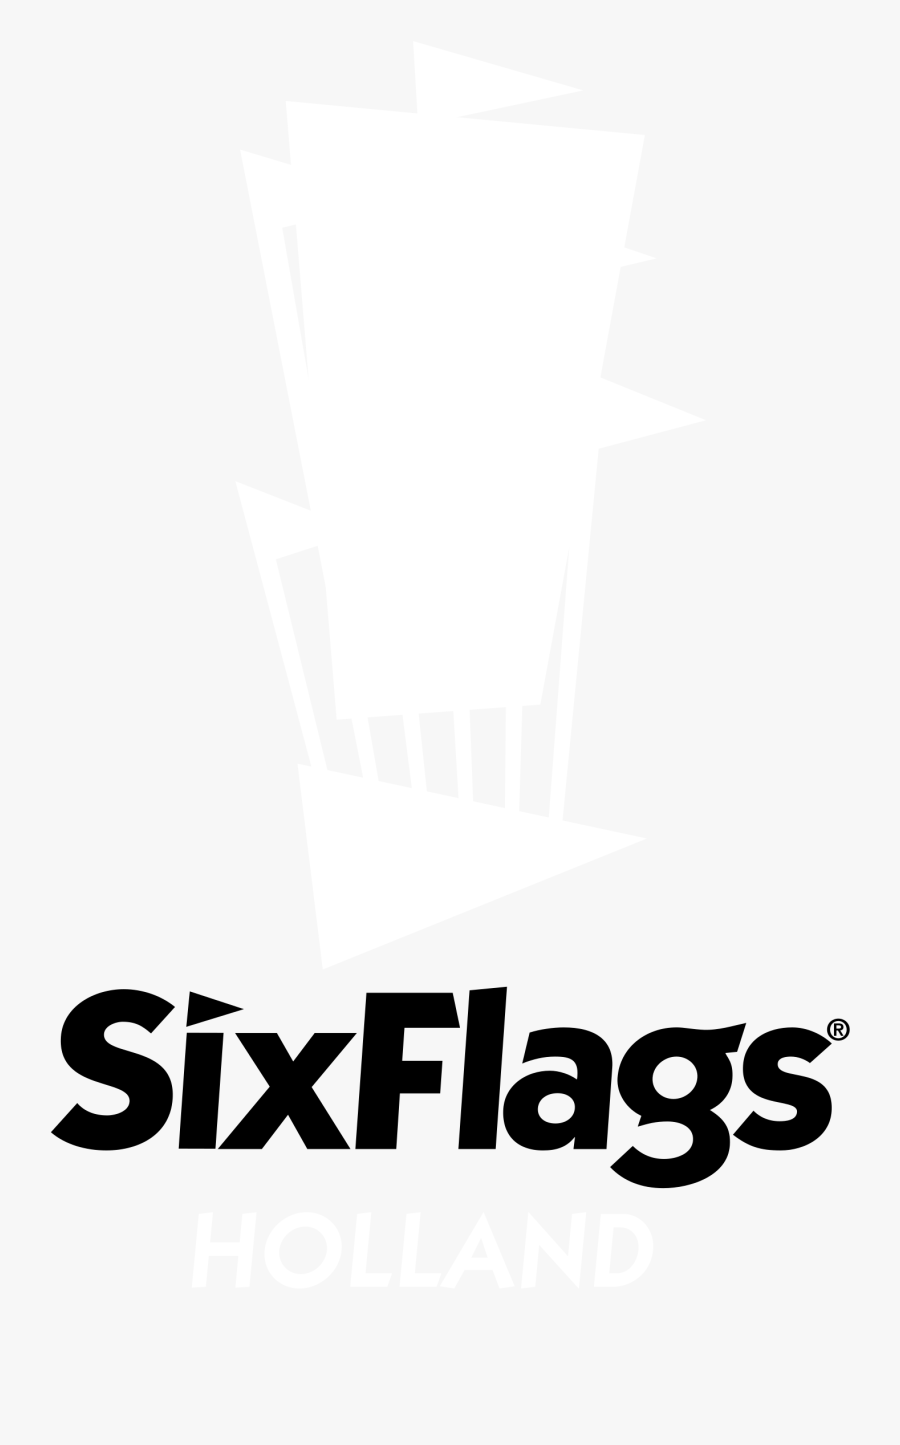 Six Flags Holland Logo Black And White - Six Flags, Transparent Clipart